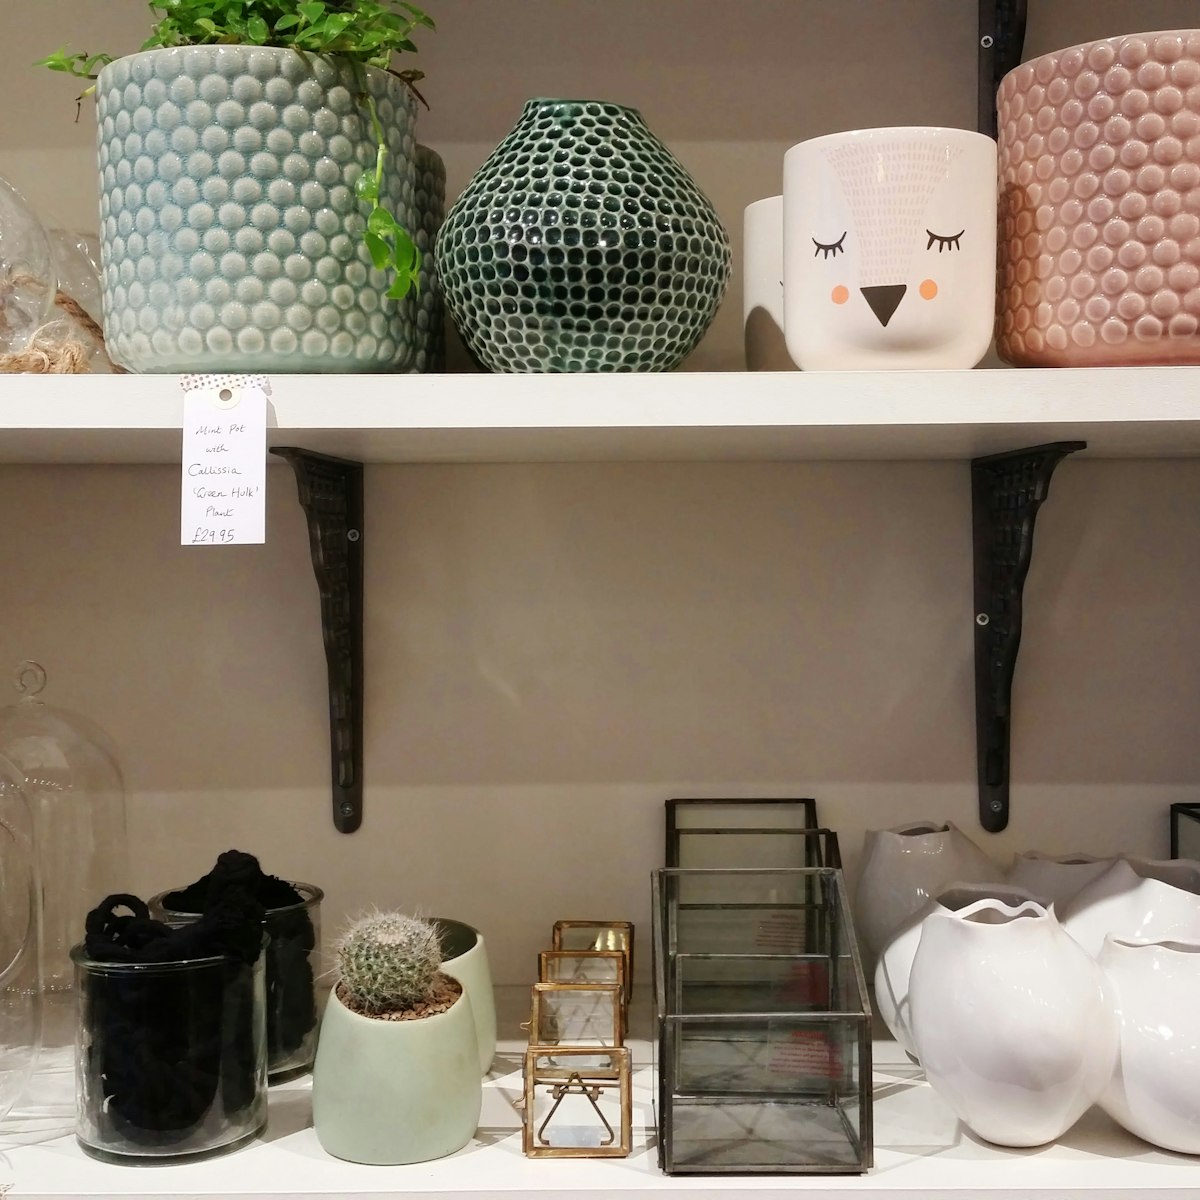 Homewares for sale in Curiouser and Curiouser